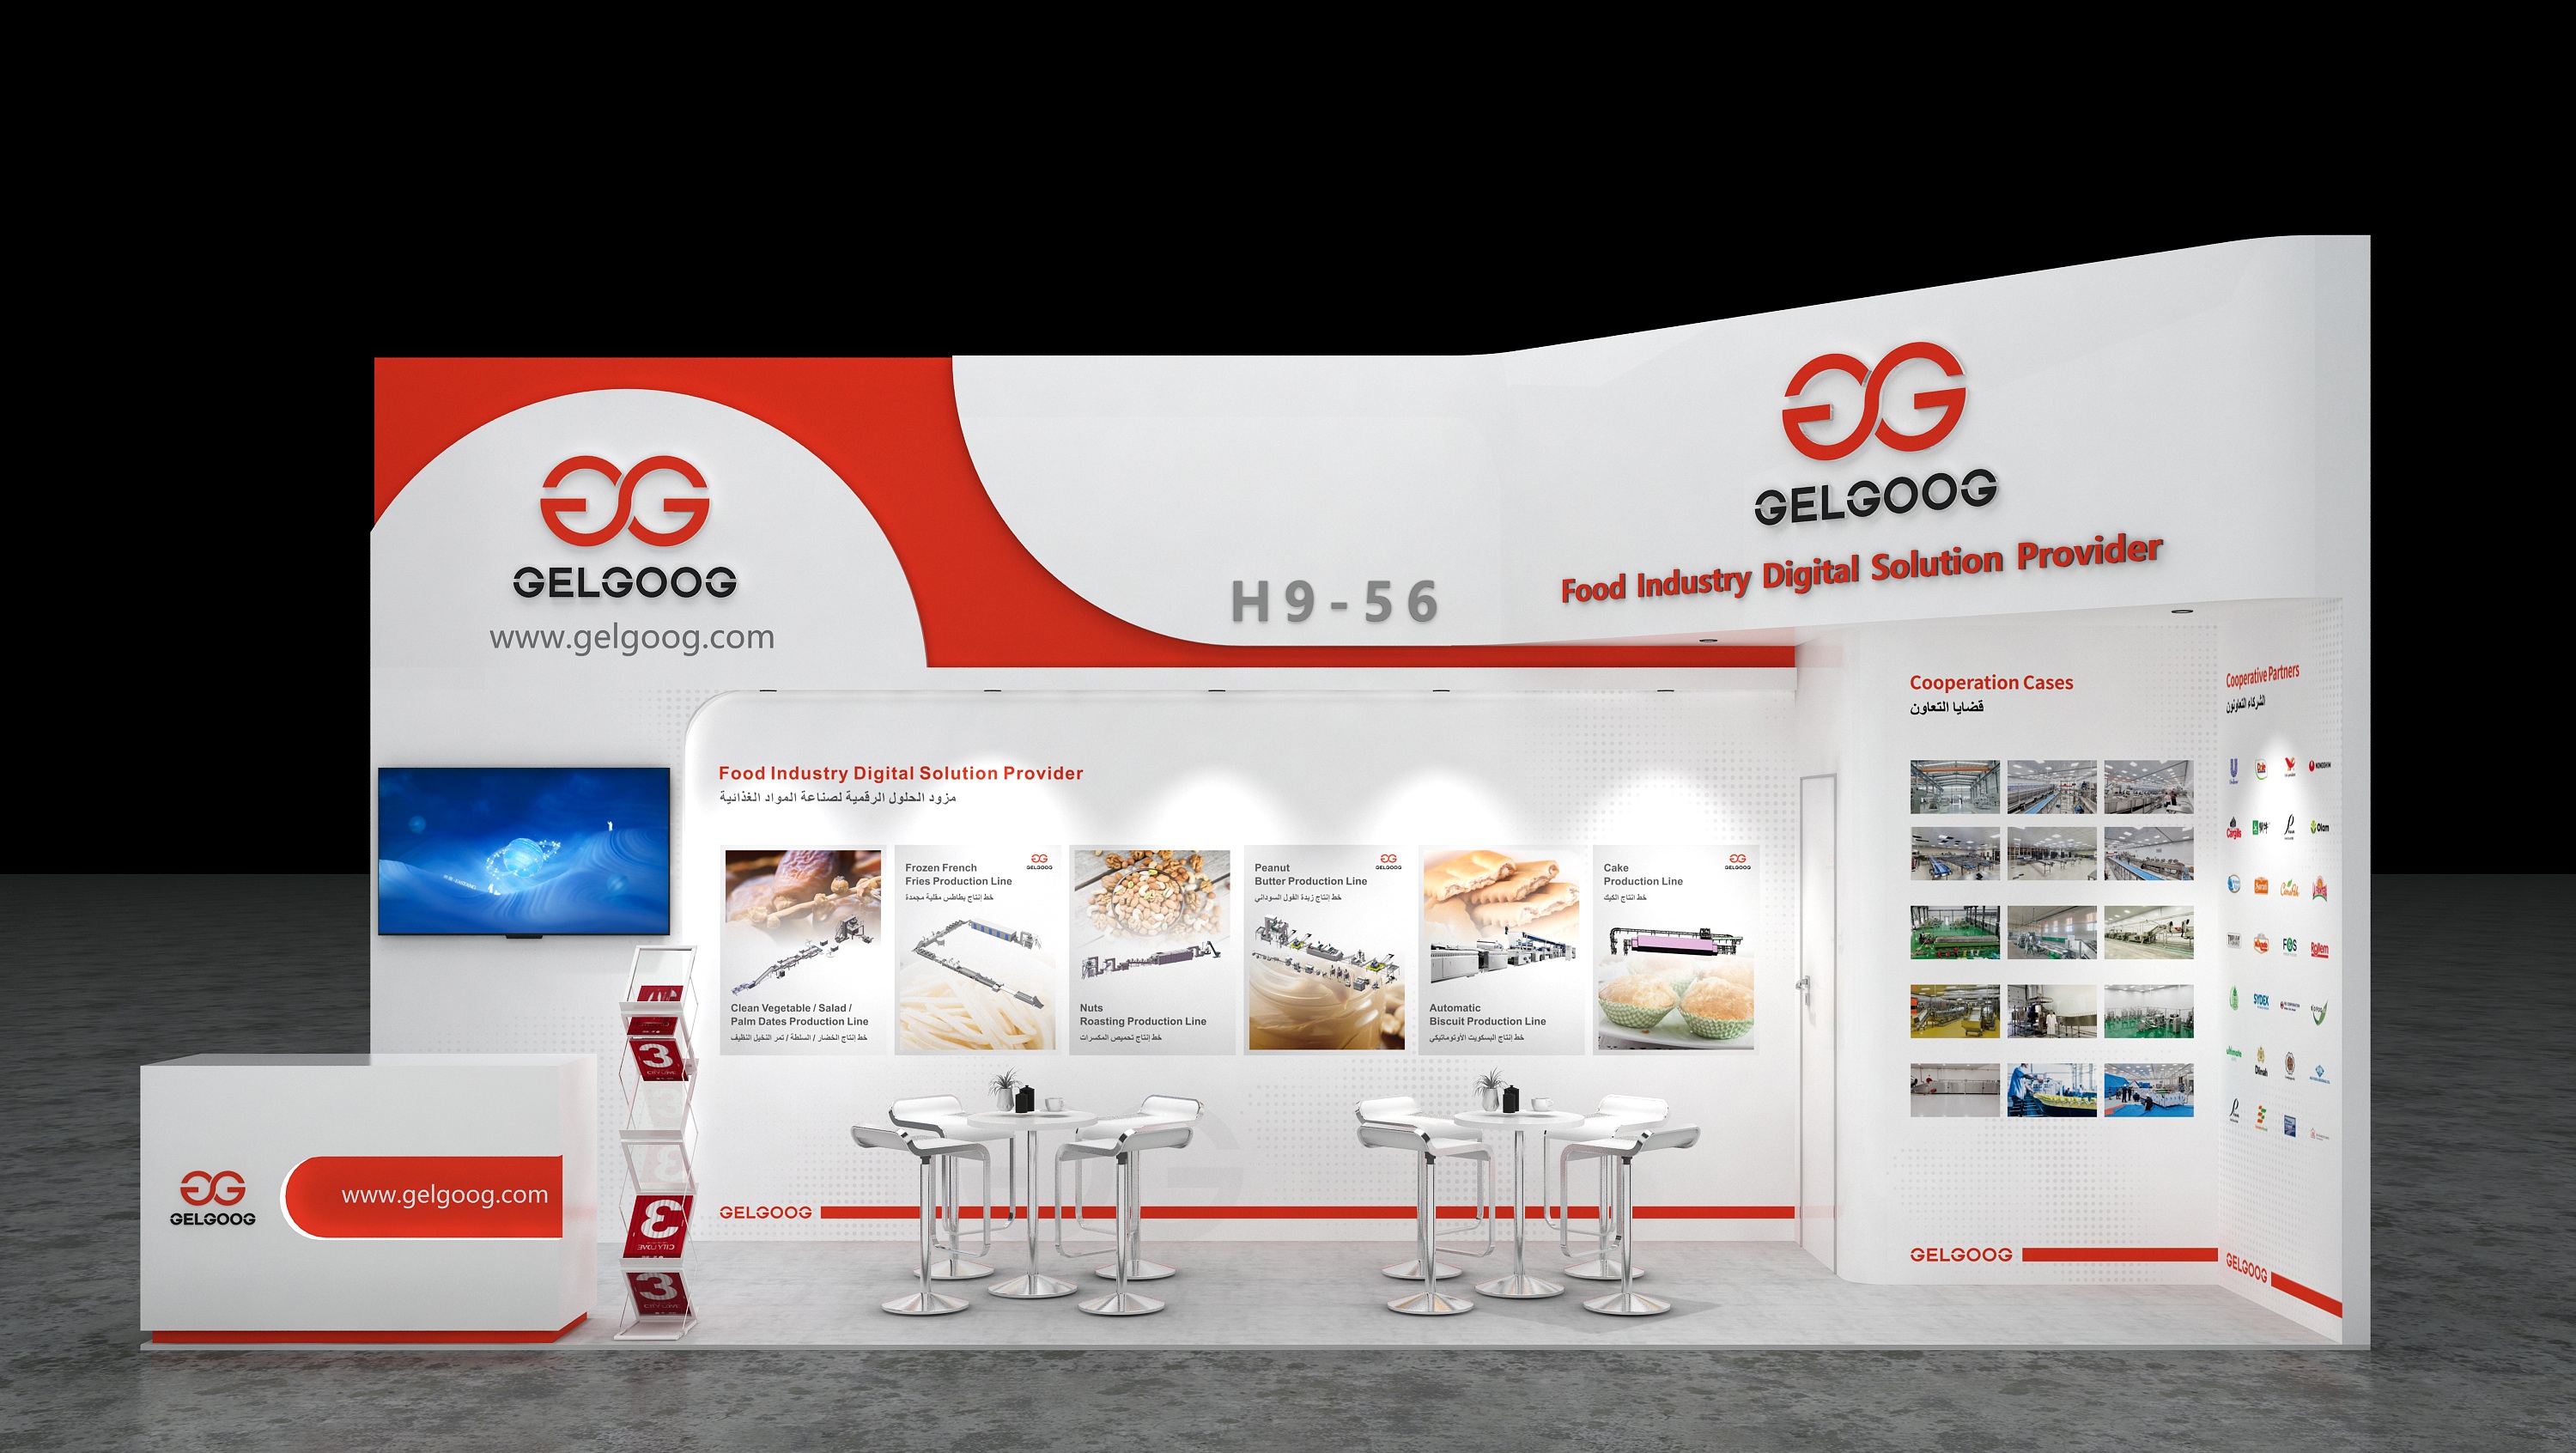 GELGOOG will participate in GULFOOD Manufacturing 2023